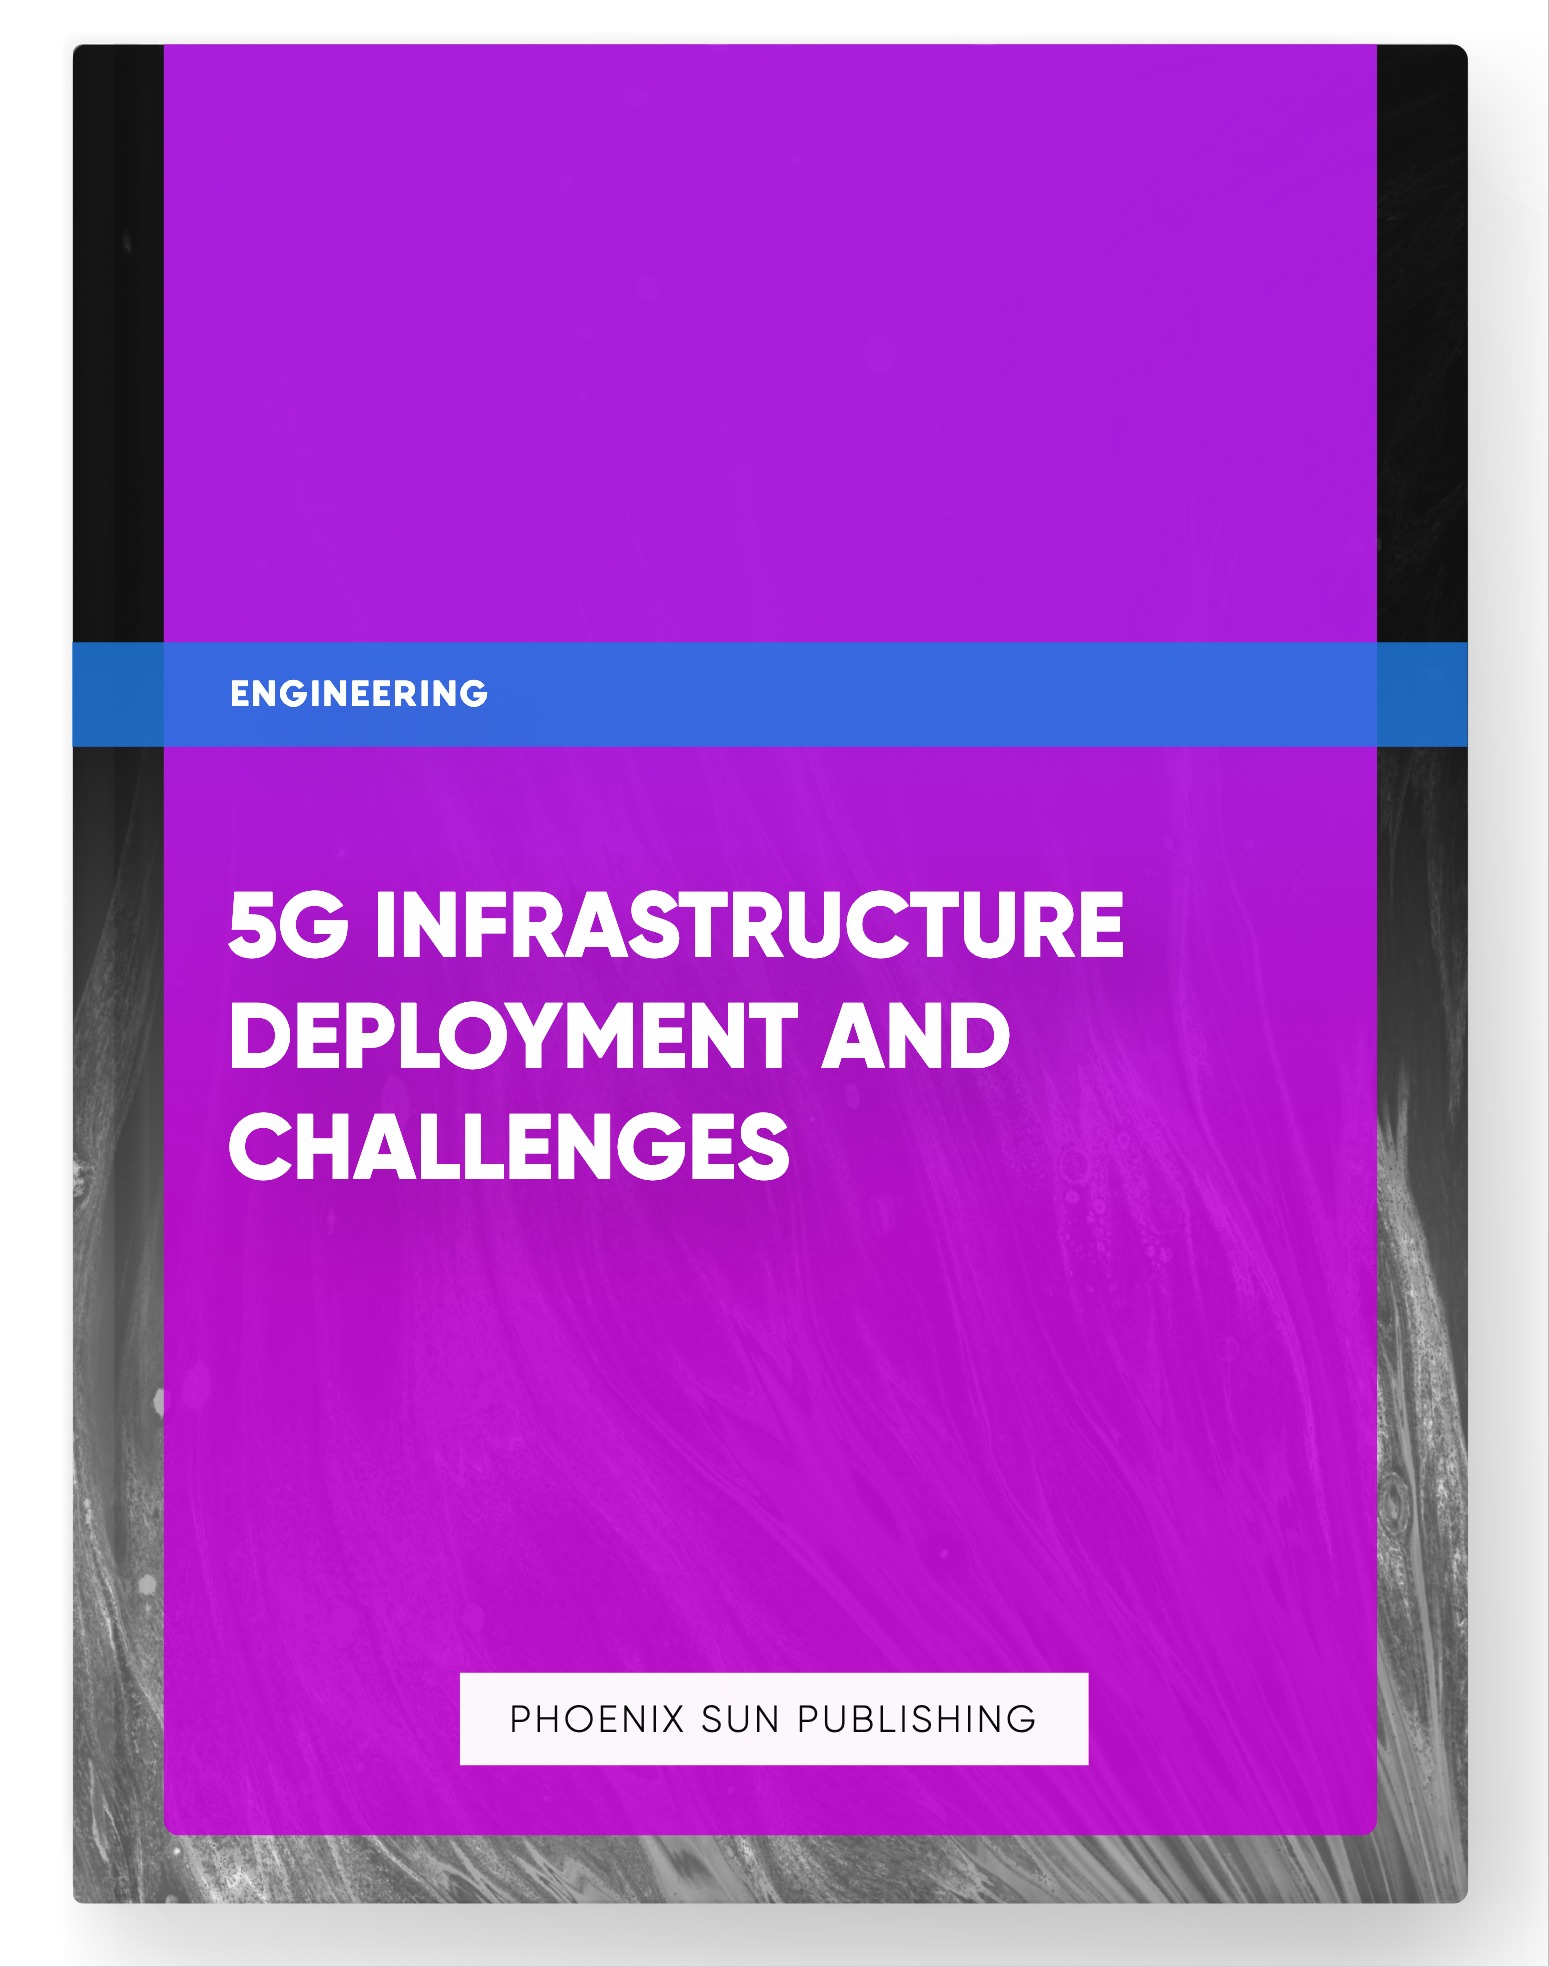 5G Infrastructure Deployment and Challenges